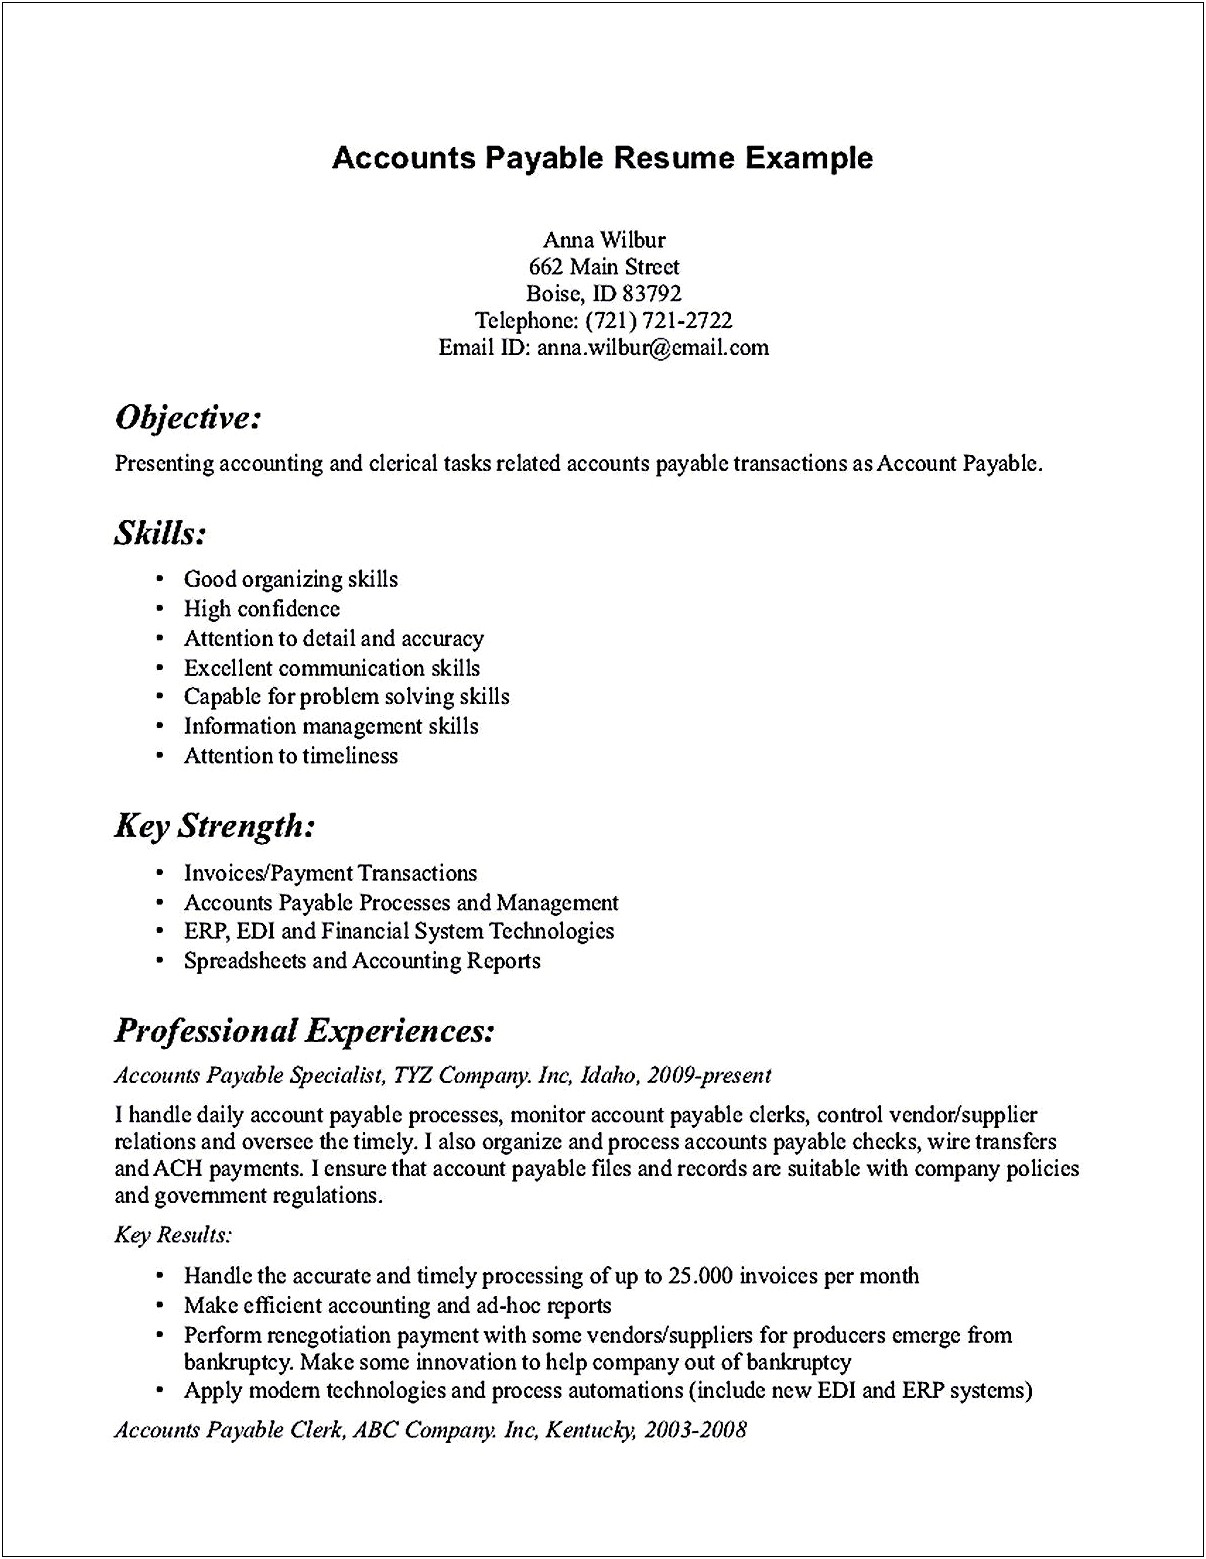 Interpersonal Skills To Mention In Resume